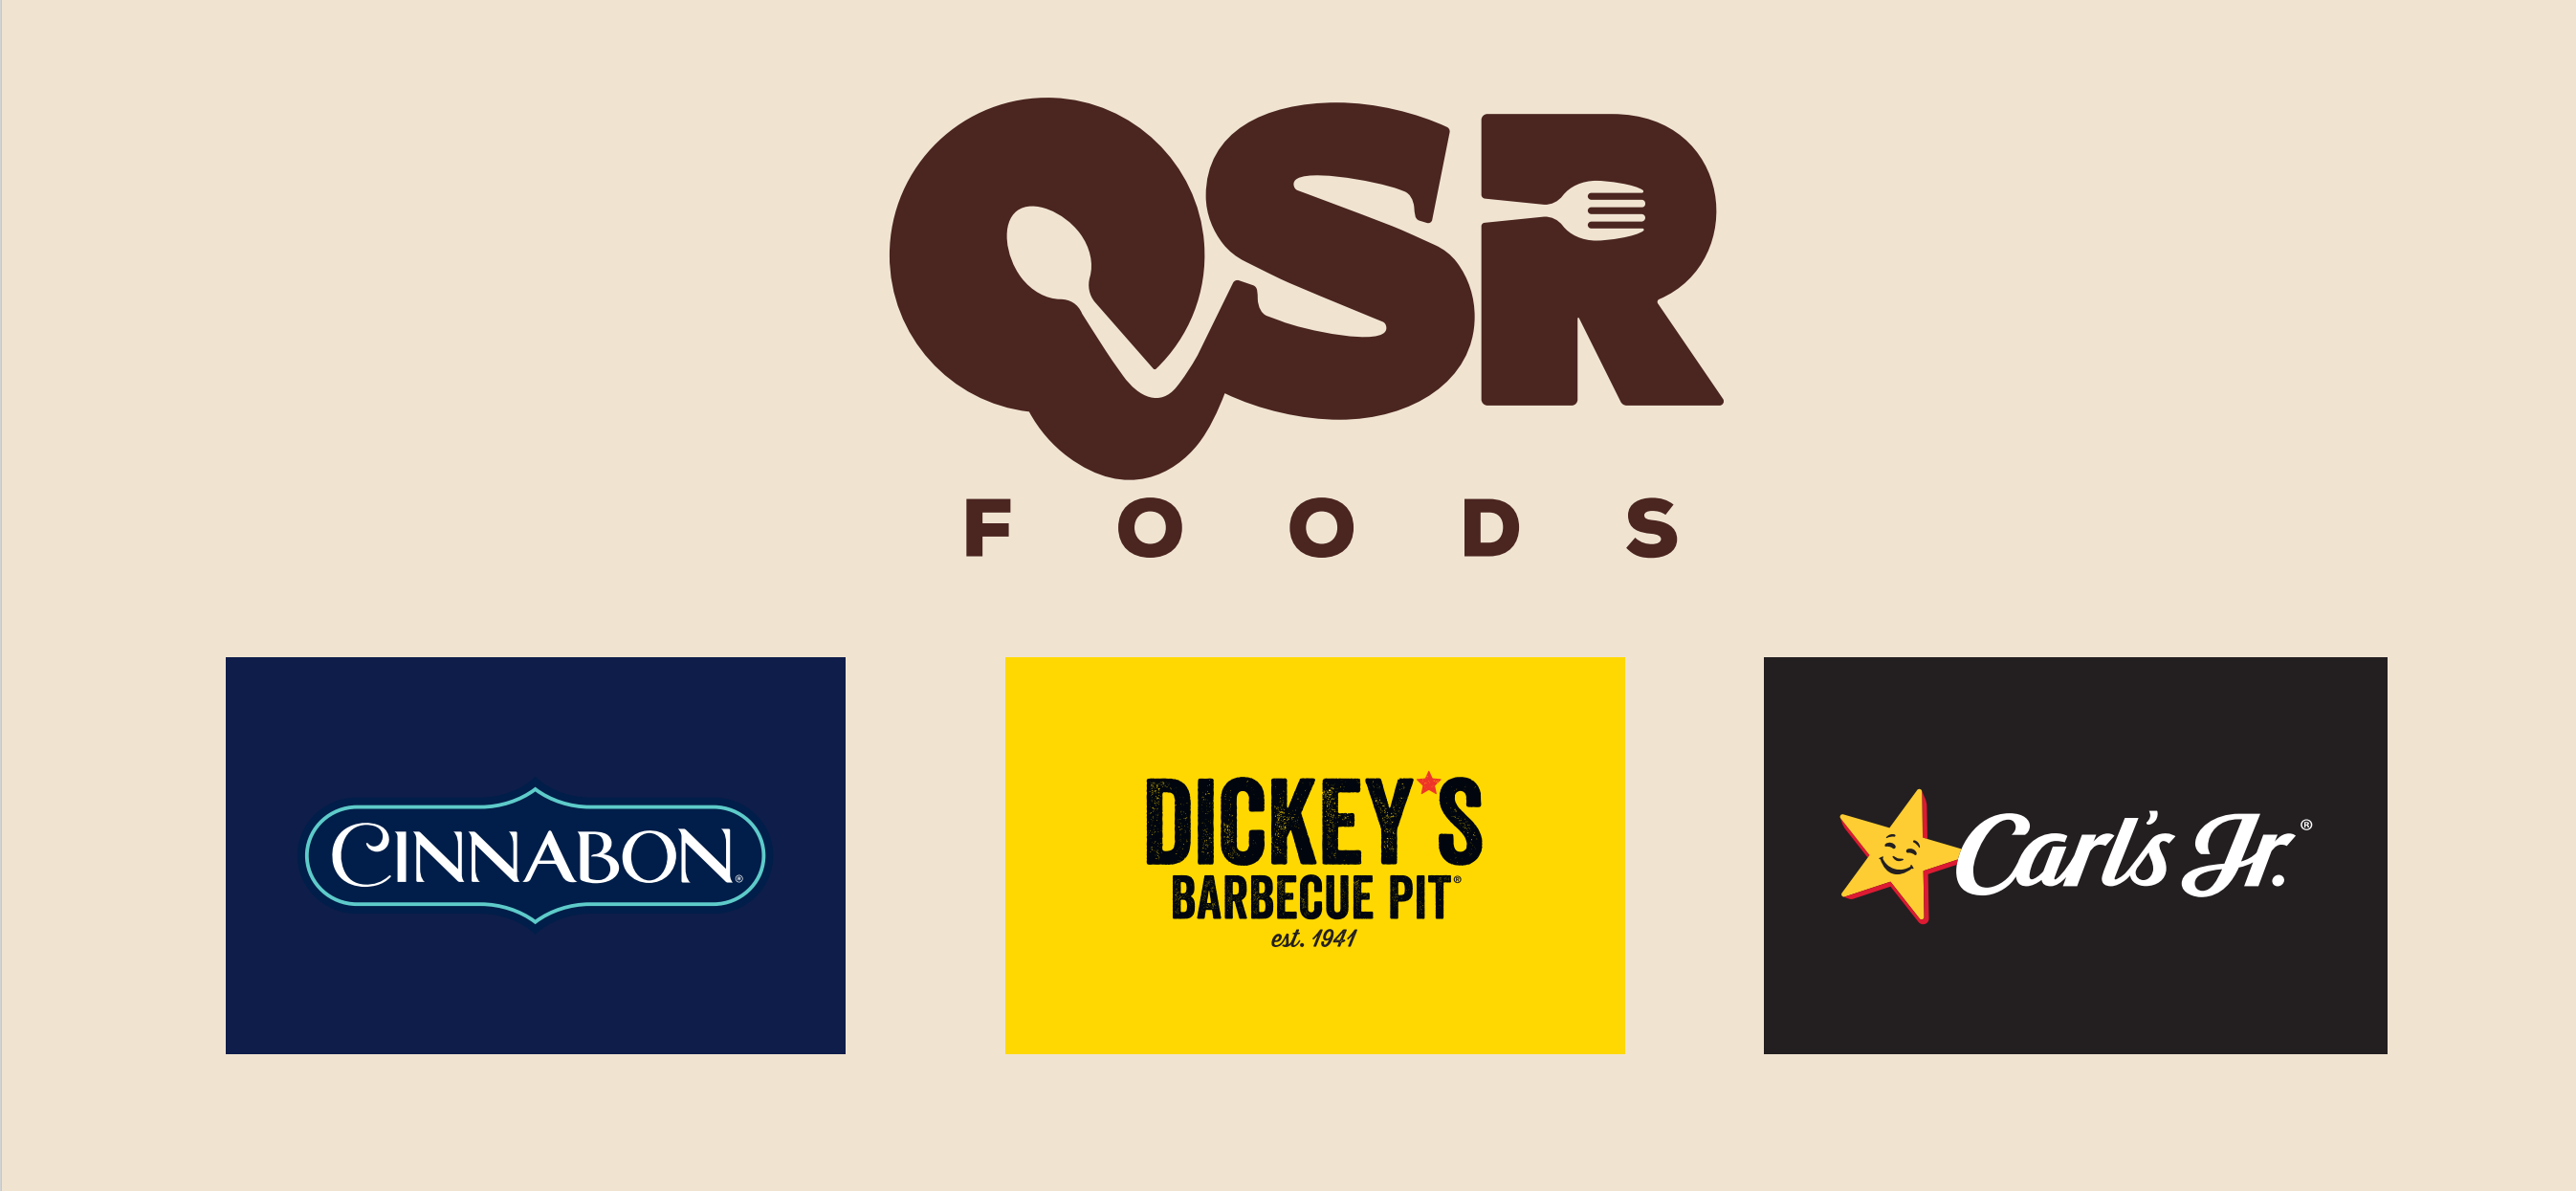 "QSR Foods is all about bringing the best foodchains around the world